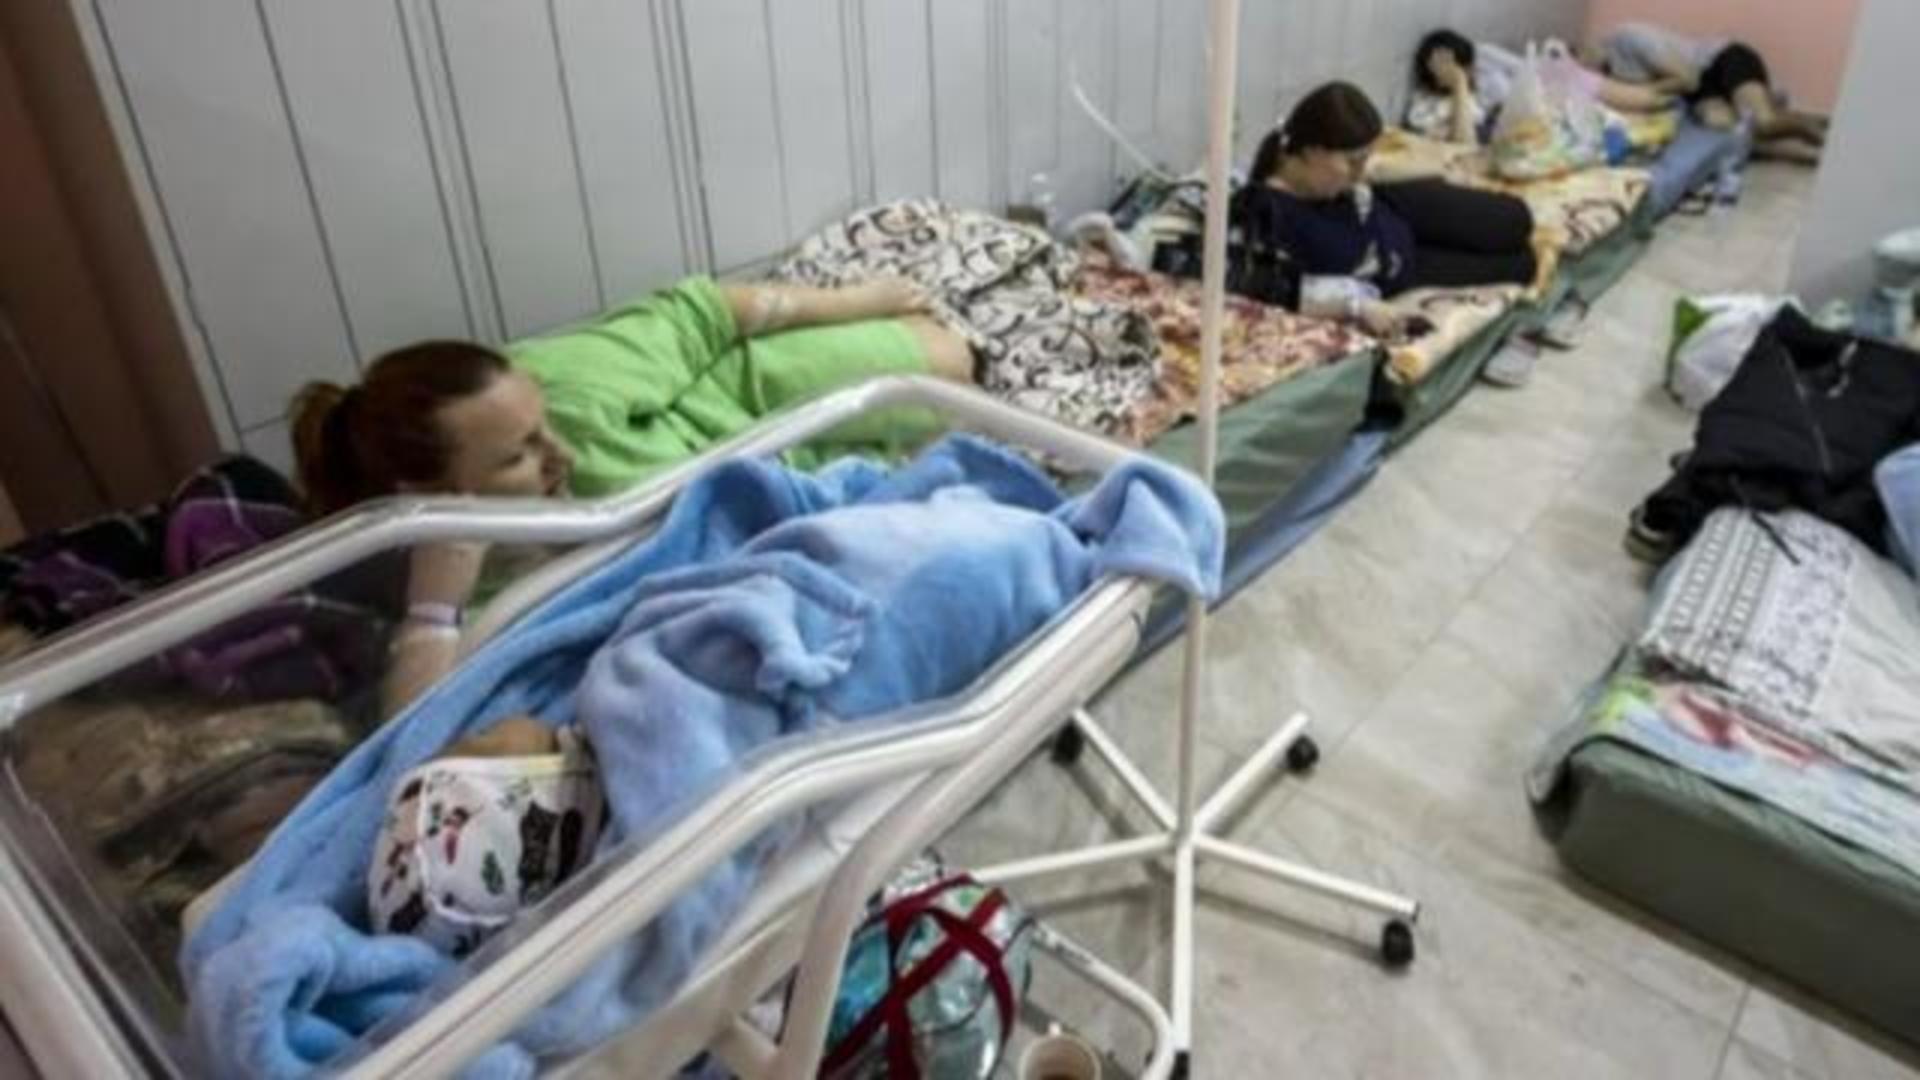 Ukrainian hospitals double as bomb shelters as doctors treat those wounded in Russian invasion